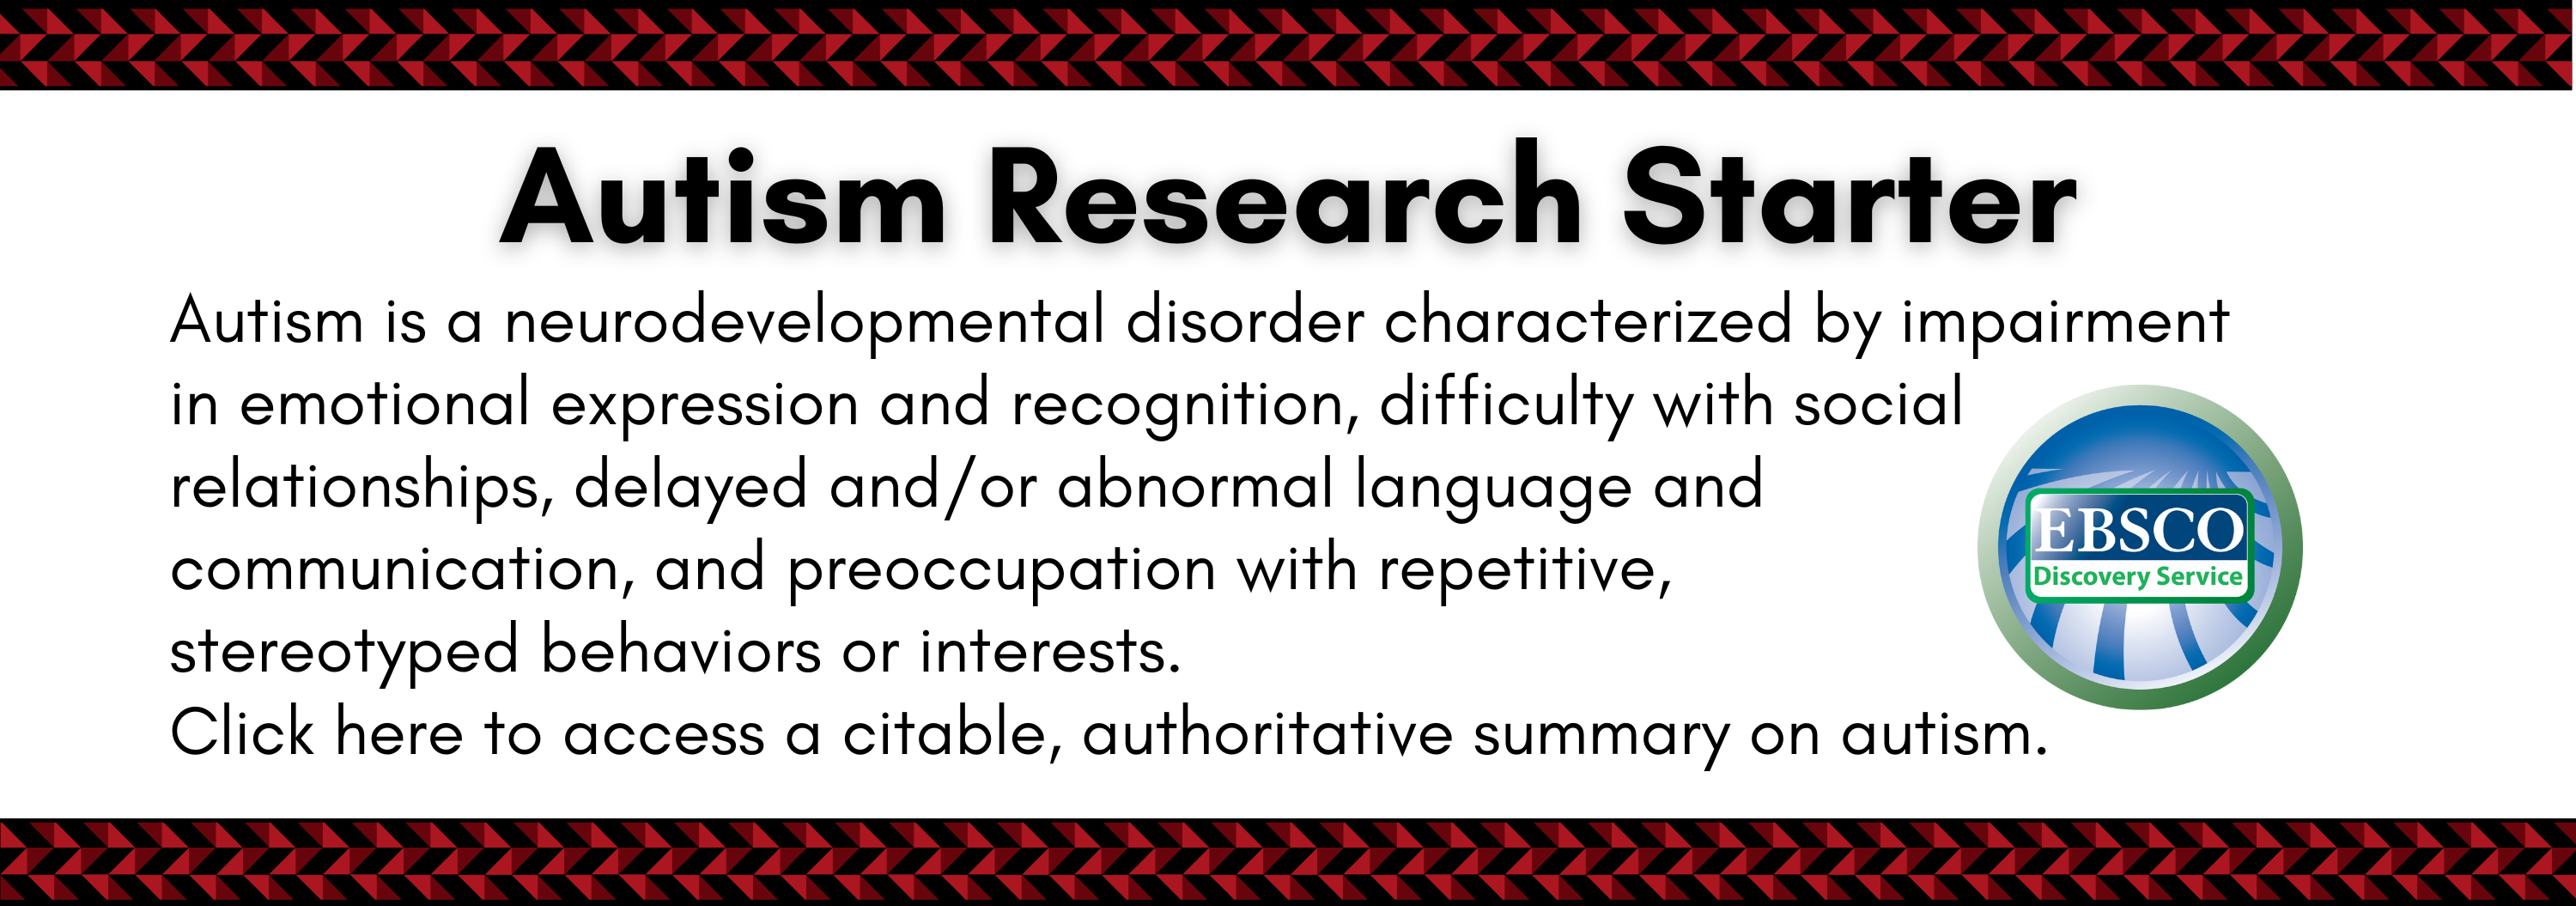 Autism Research Starter from EBSCO Discovery Service